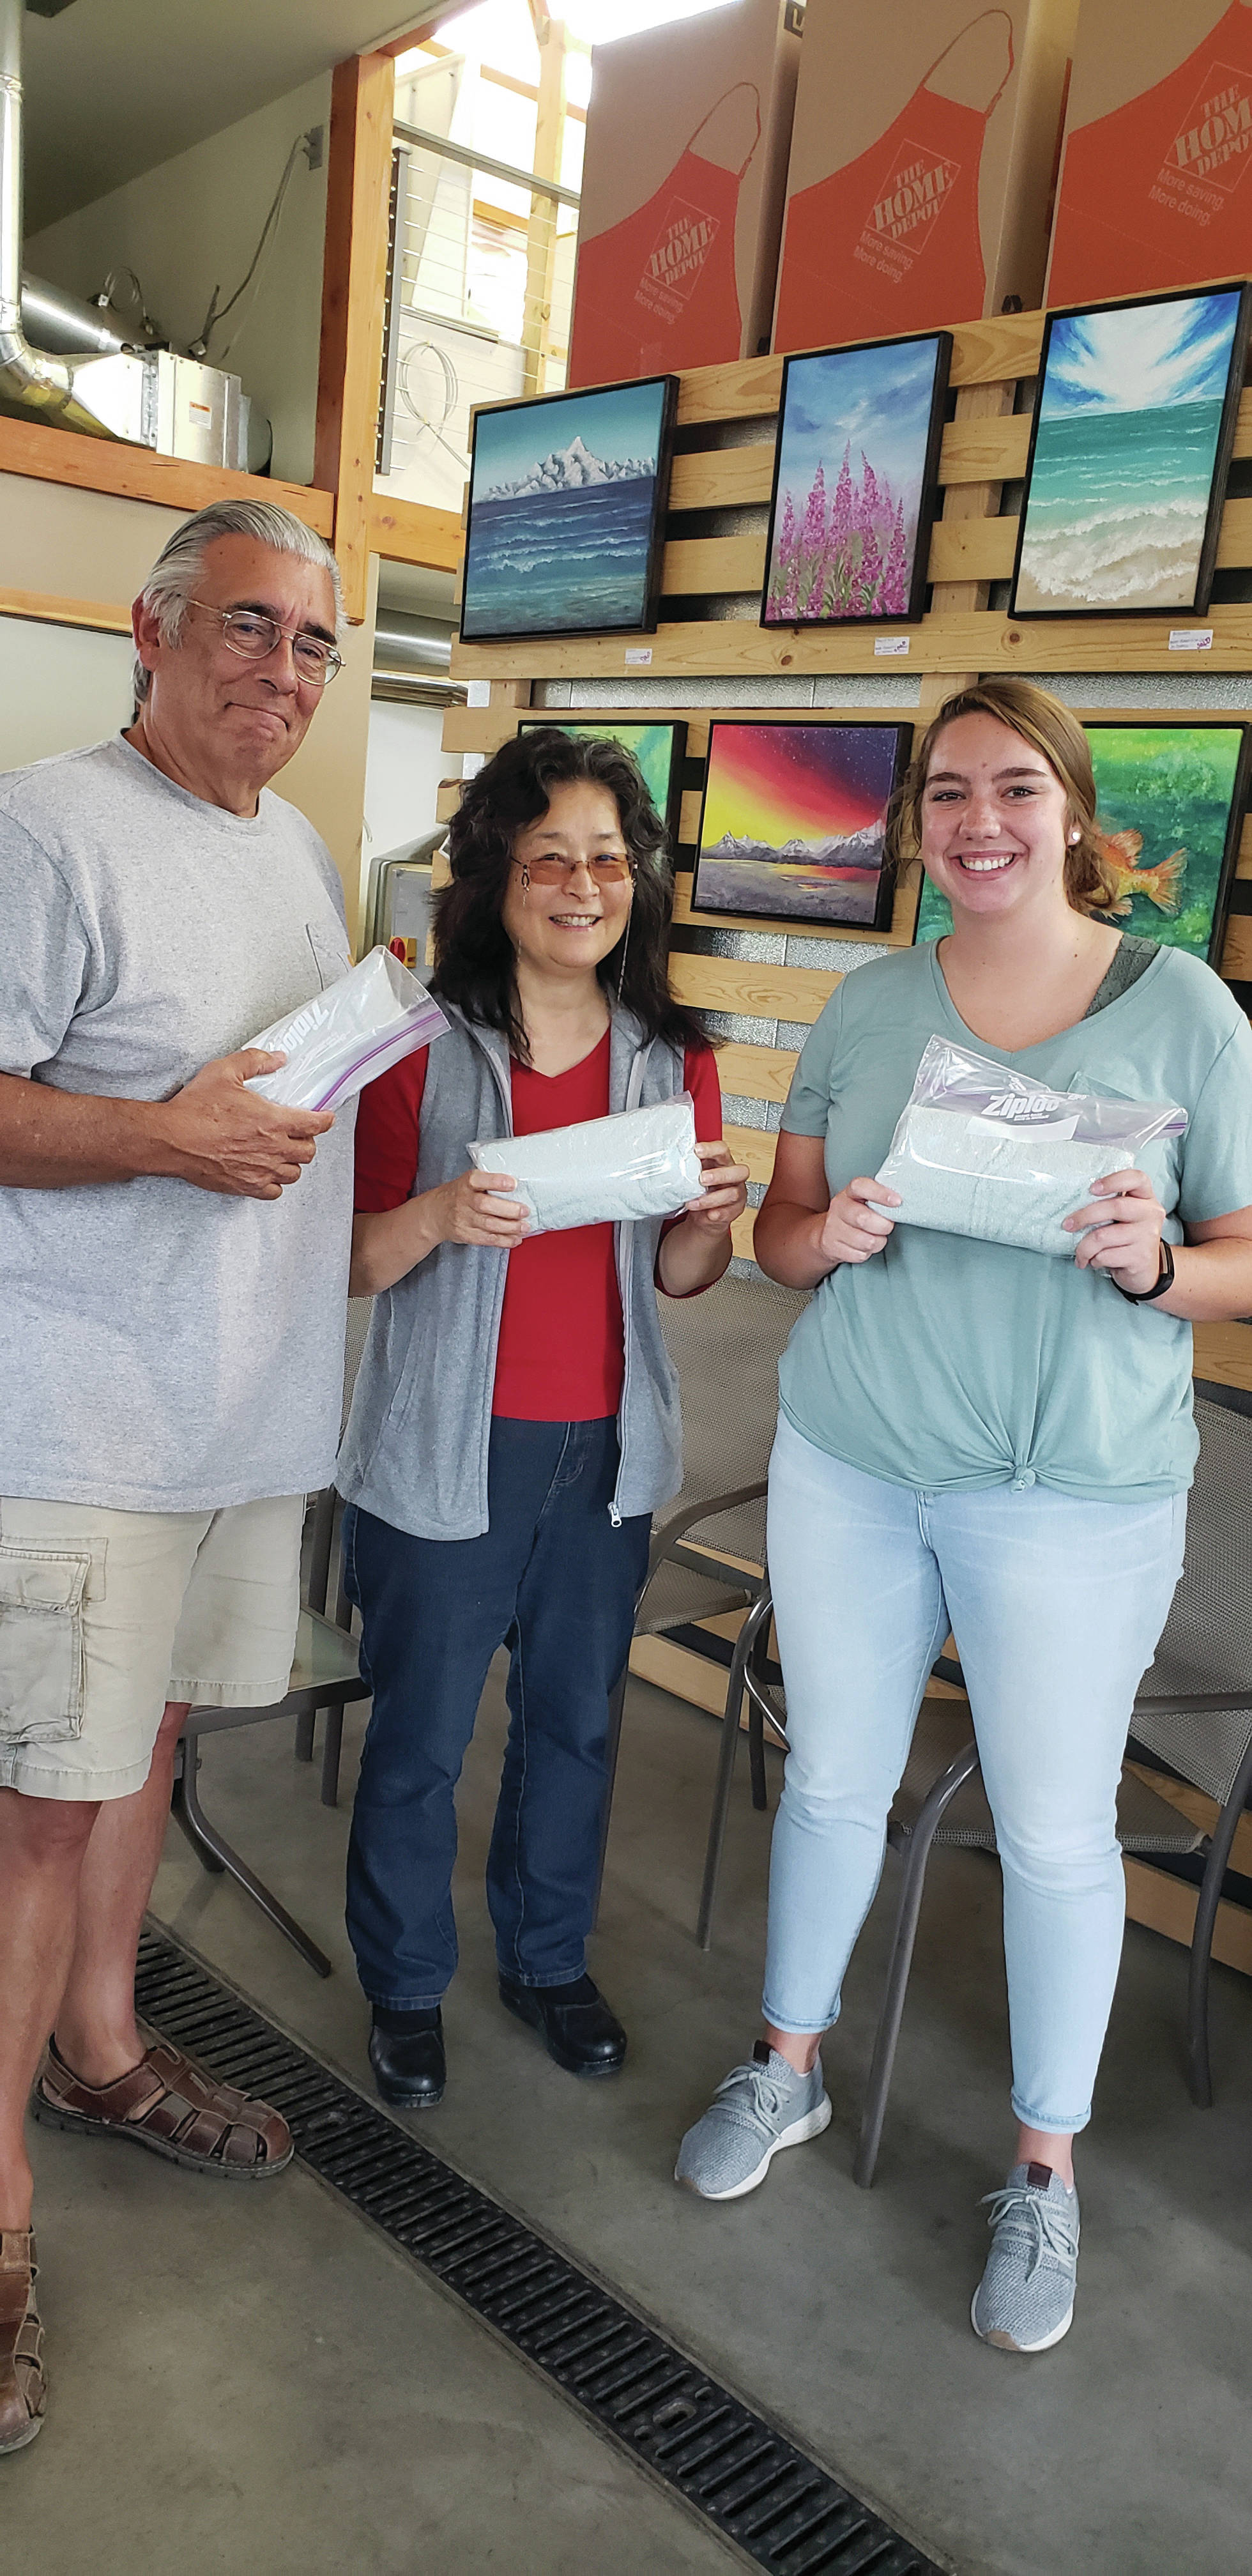 Hal and Lynn Spence and visiting student Sydney Butterfield show examples of three completed hygiene kits that have been sent to the nation’s southern border from Homer. On July 22, 2019, the Spences and Butterfield dropped by 24 completed kits to Grace Ridge Brewery in Homer, Alaska. The kits are distributed by the United Methodist Committee on Relief to transition centers. Monetary donations, items for kits and assembled kits are still being accepted to make a difference at the border. They can be dropped by Grace Ridge Brewing or Homer United Methodist Church. More than 200 kits have been sent from Homer. Another event to help assemble additional kits will be held later in September. (Photo by Sherry Stead)